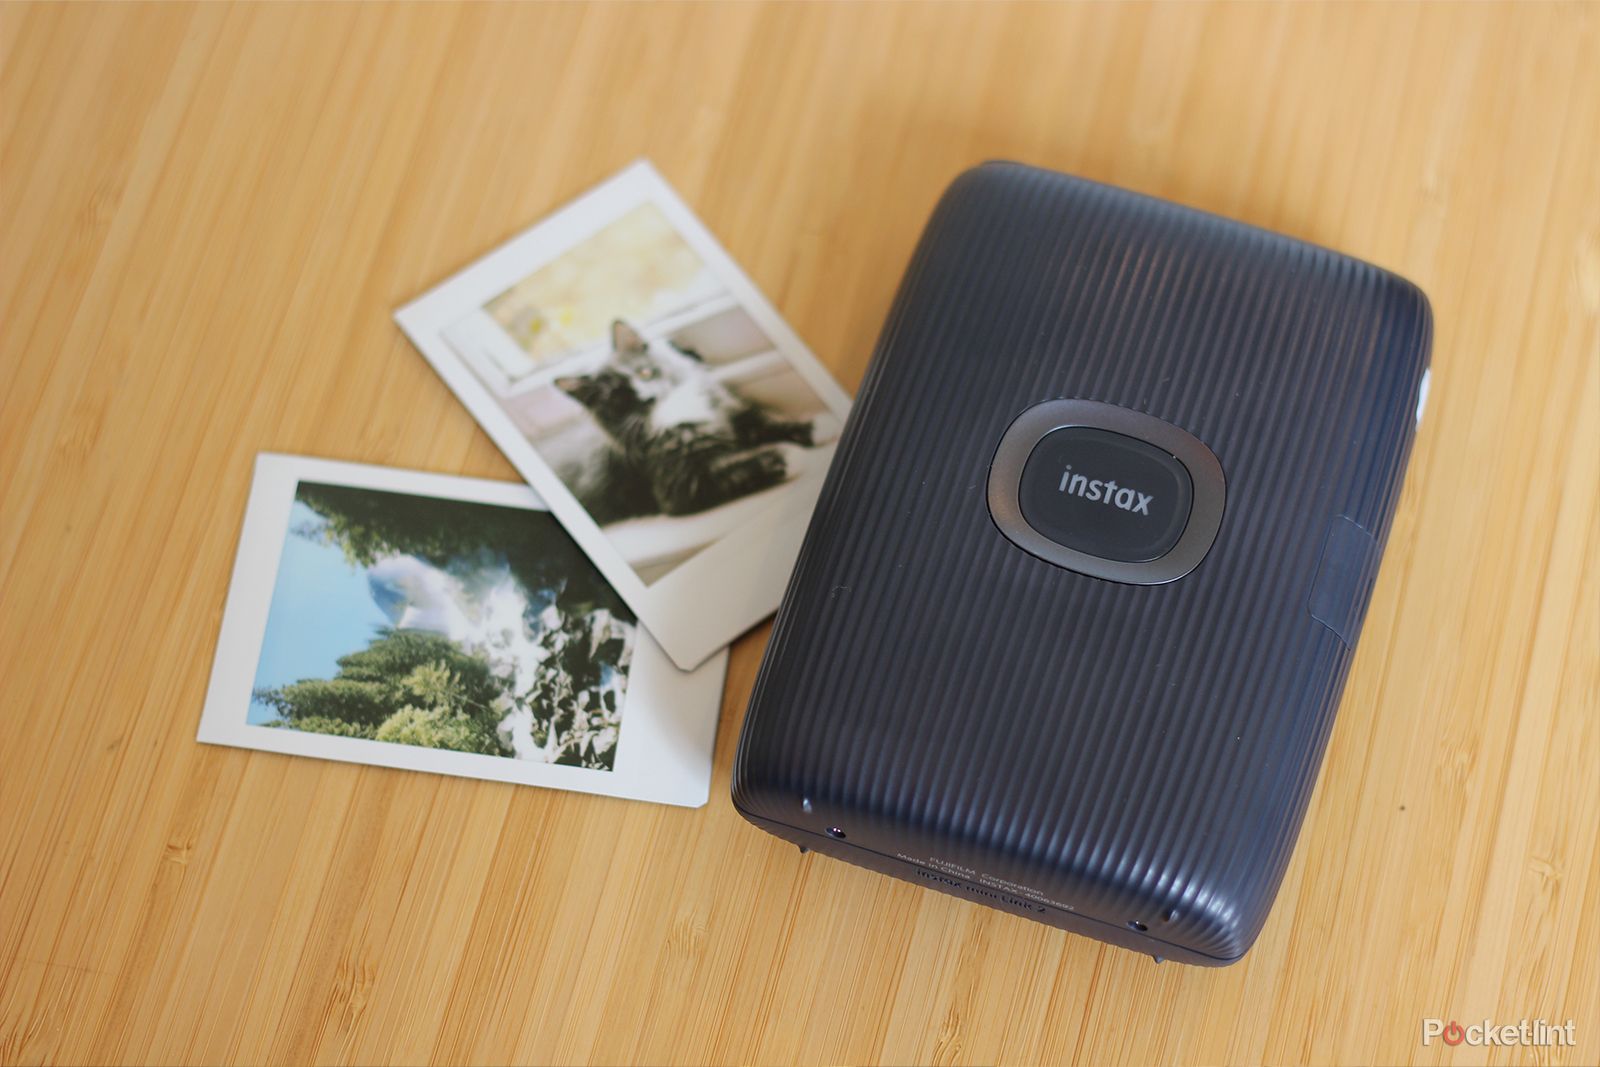 The Instax Mini Link 2 is a slightly upgraded instant printer photo 1